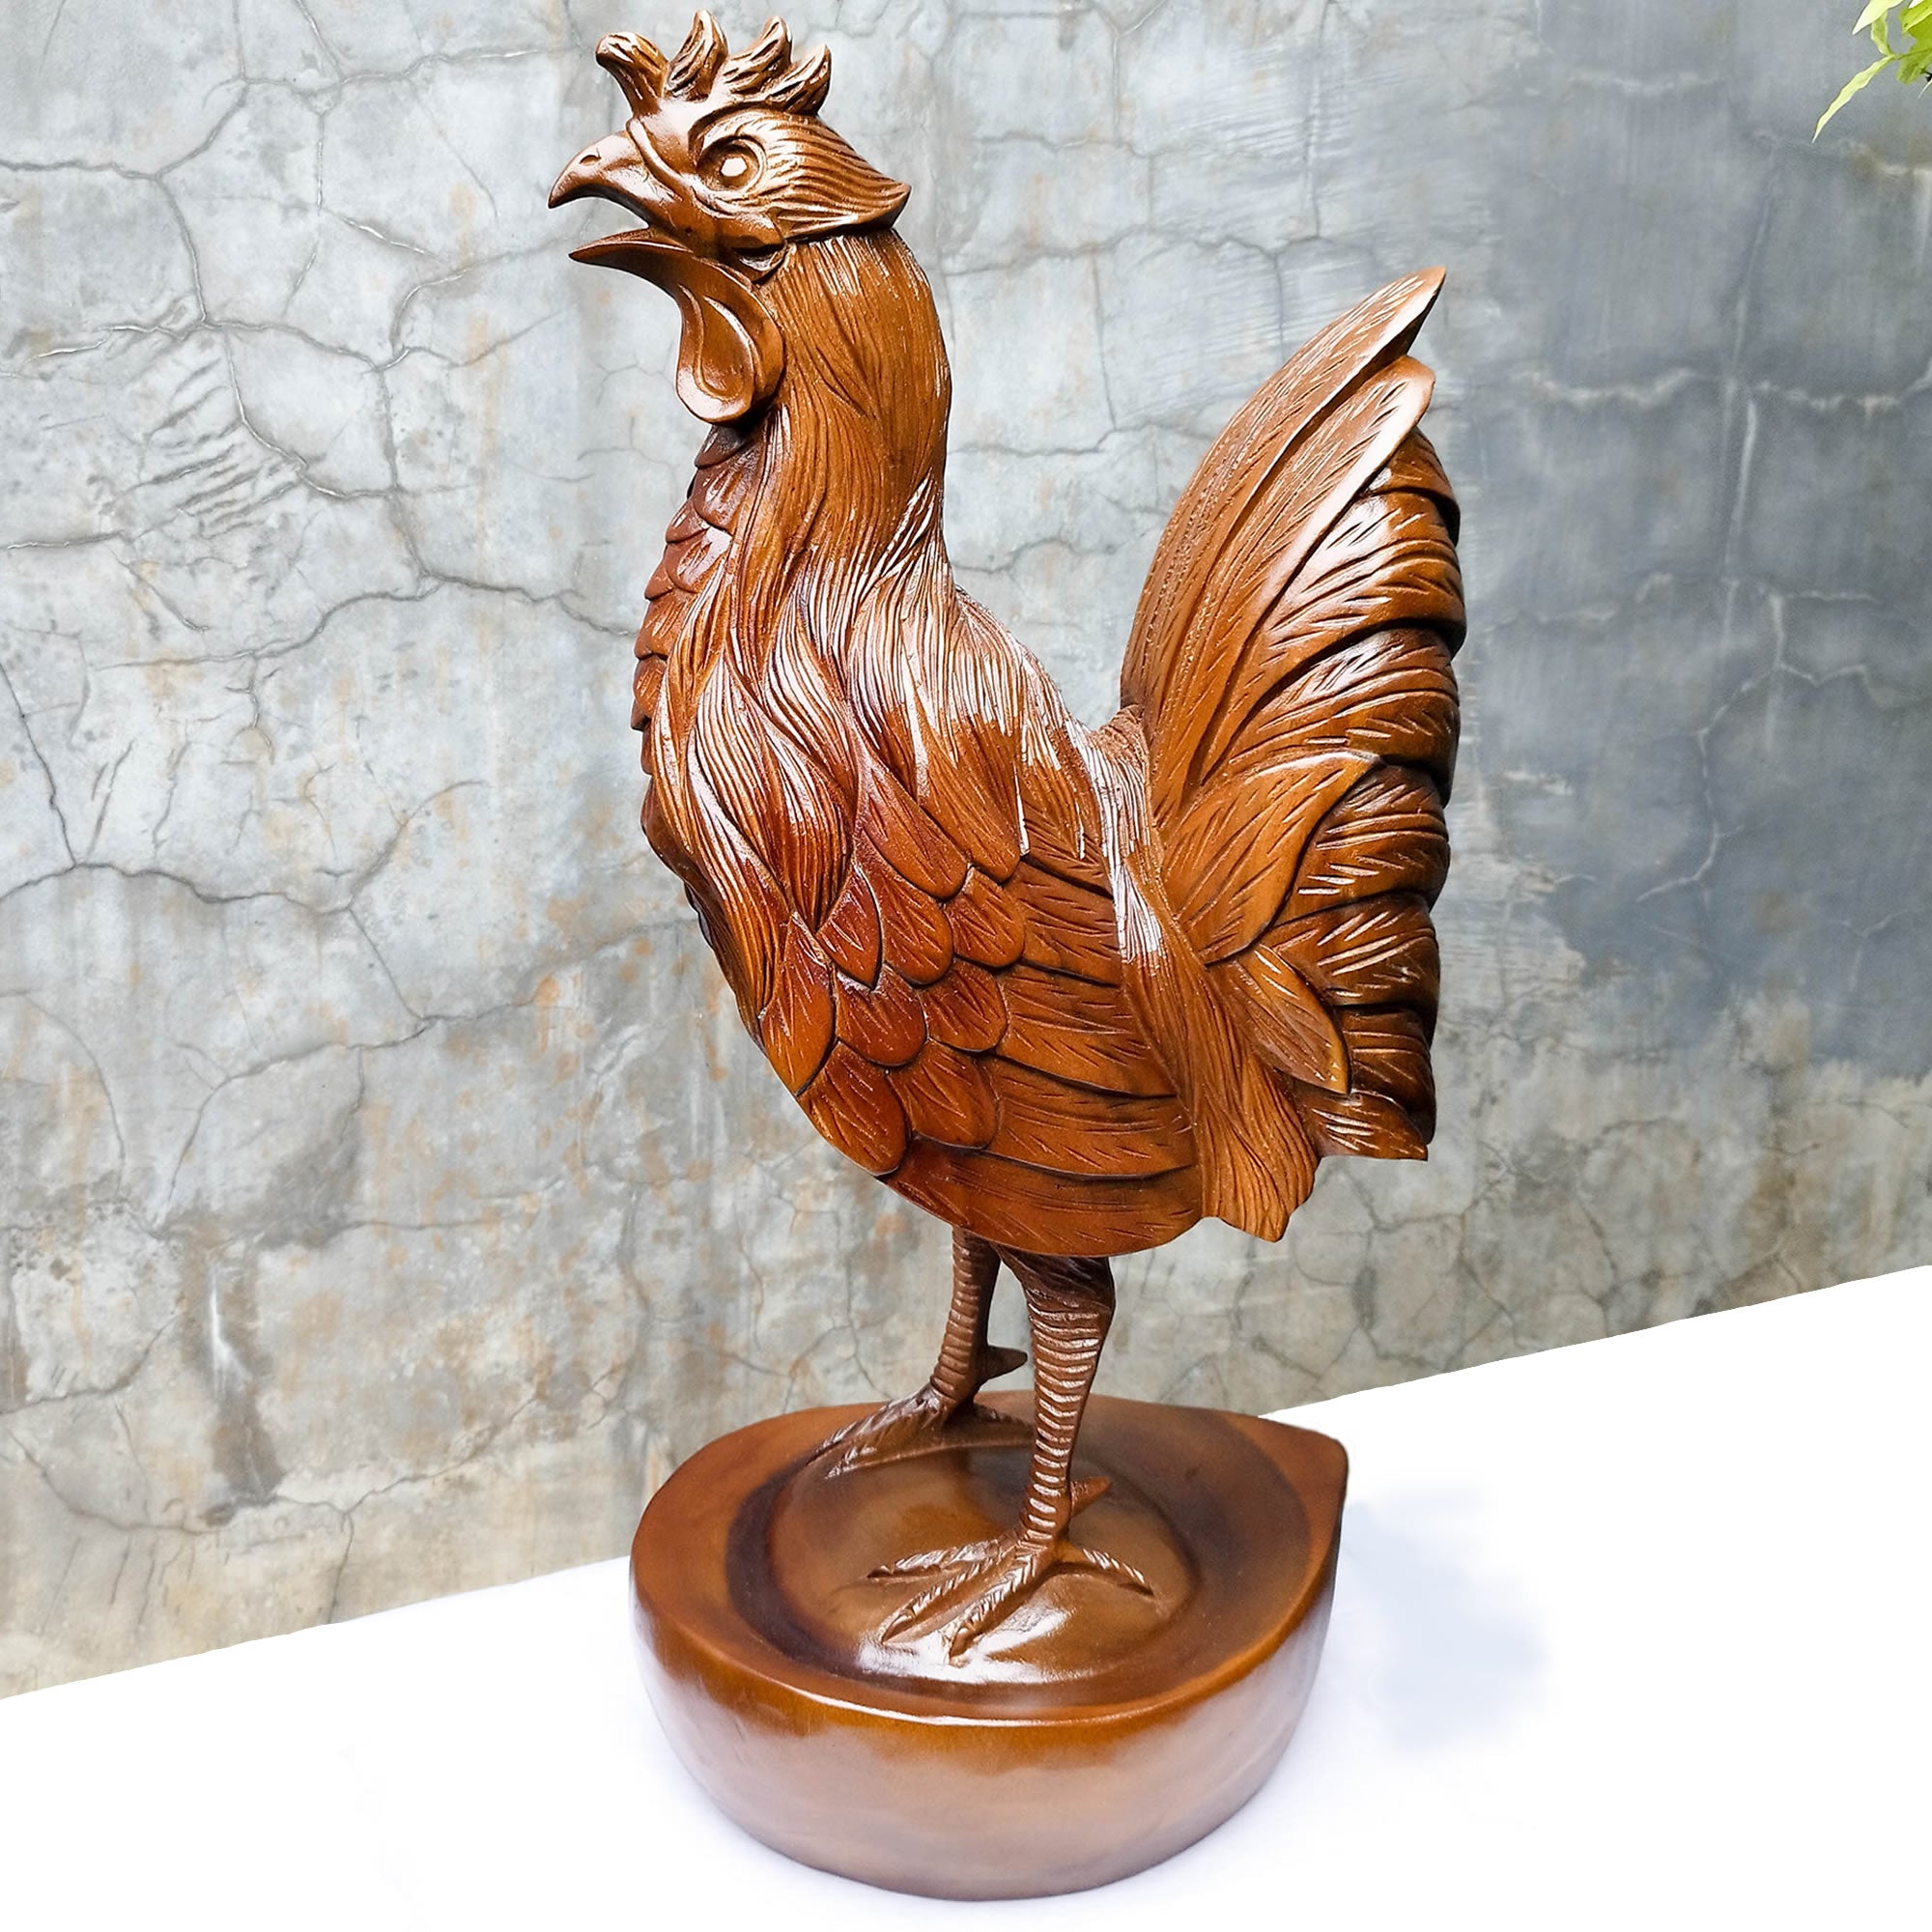 This stunning large hand-carved teakwood decorative Rooster Chicken sculpture is quite impressive and unique. 